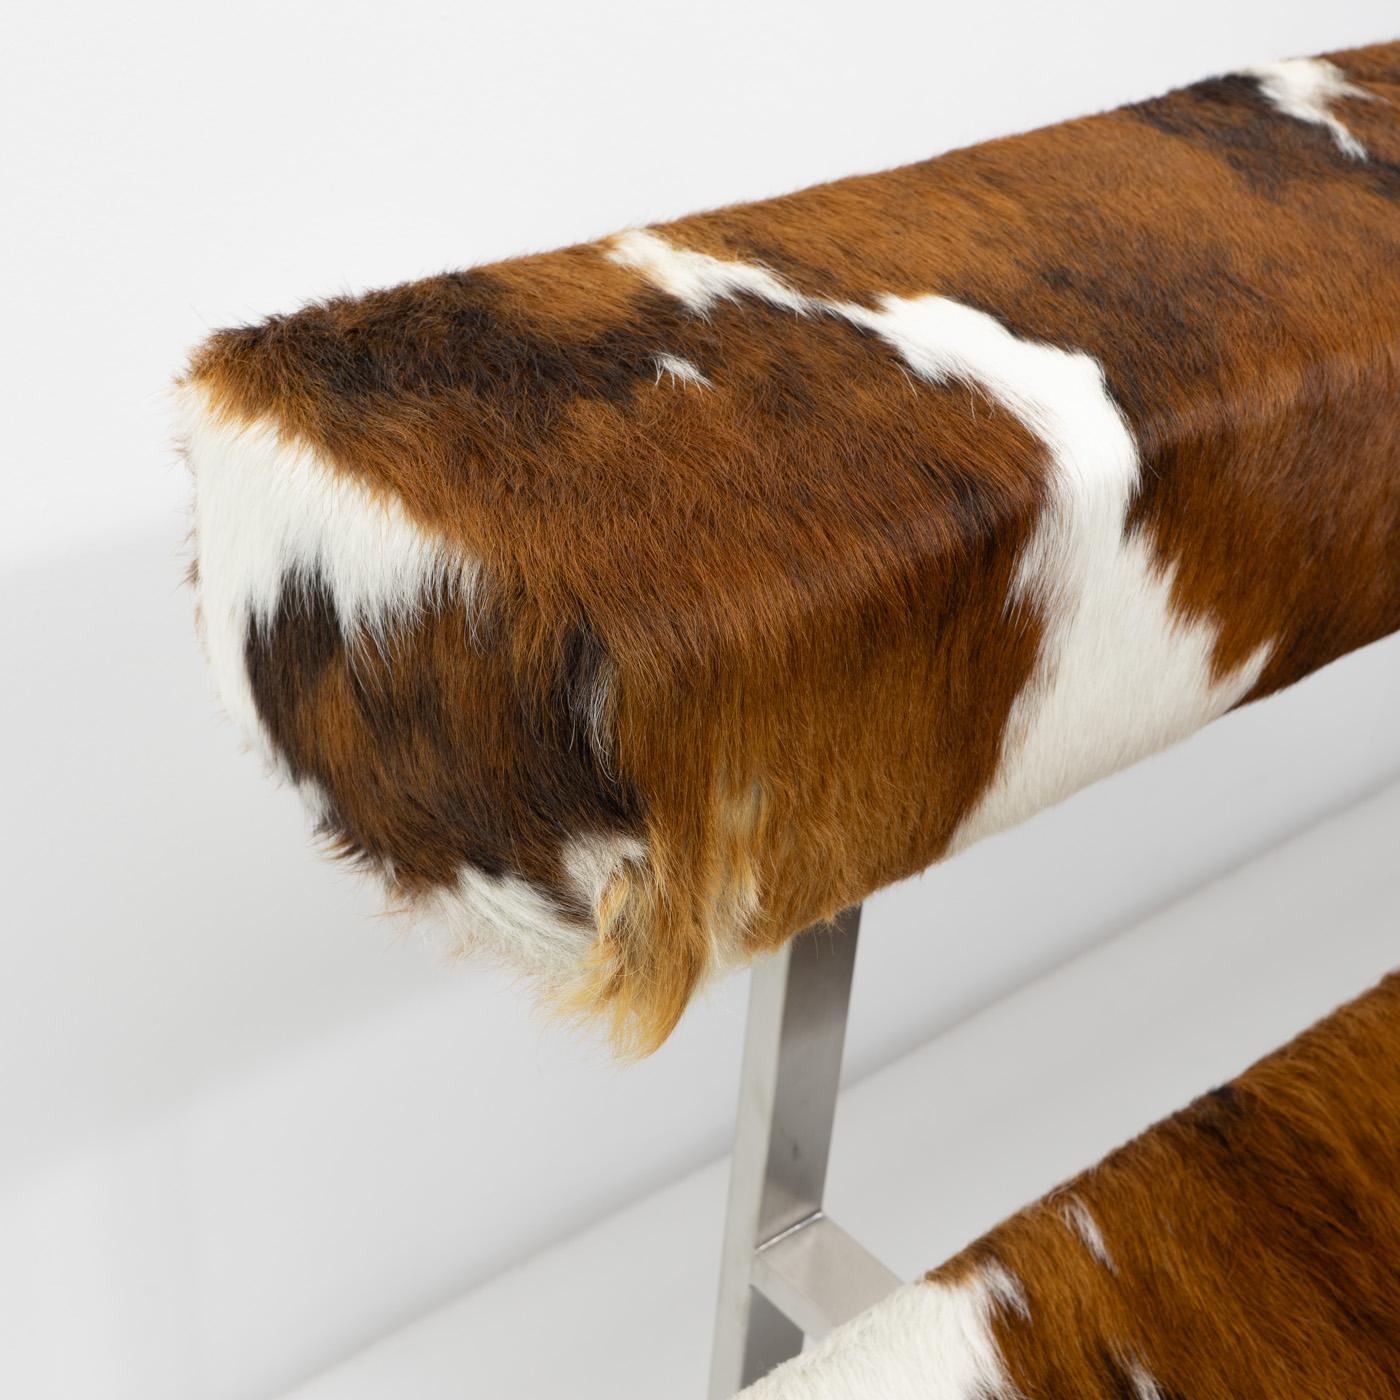 Swiss Design Permesso Bench in cowhide, by Girsberger - 2000s For Sale 4